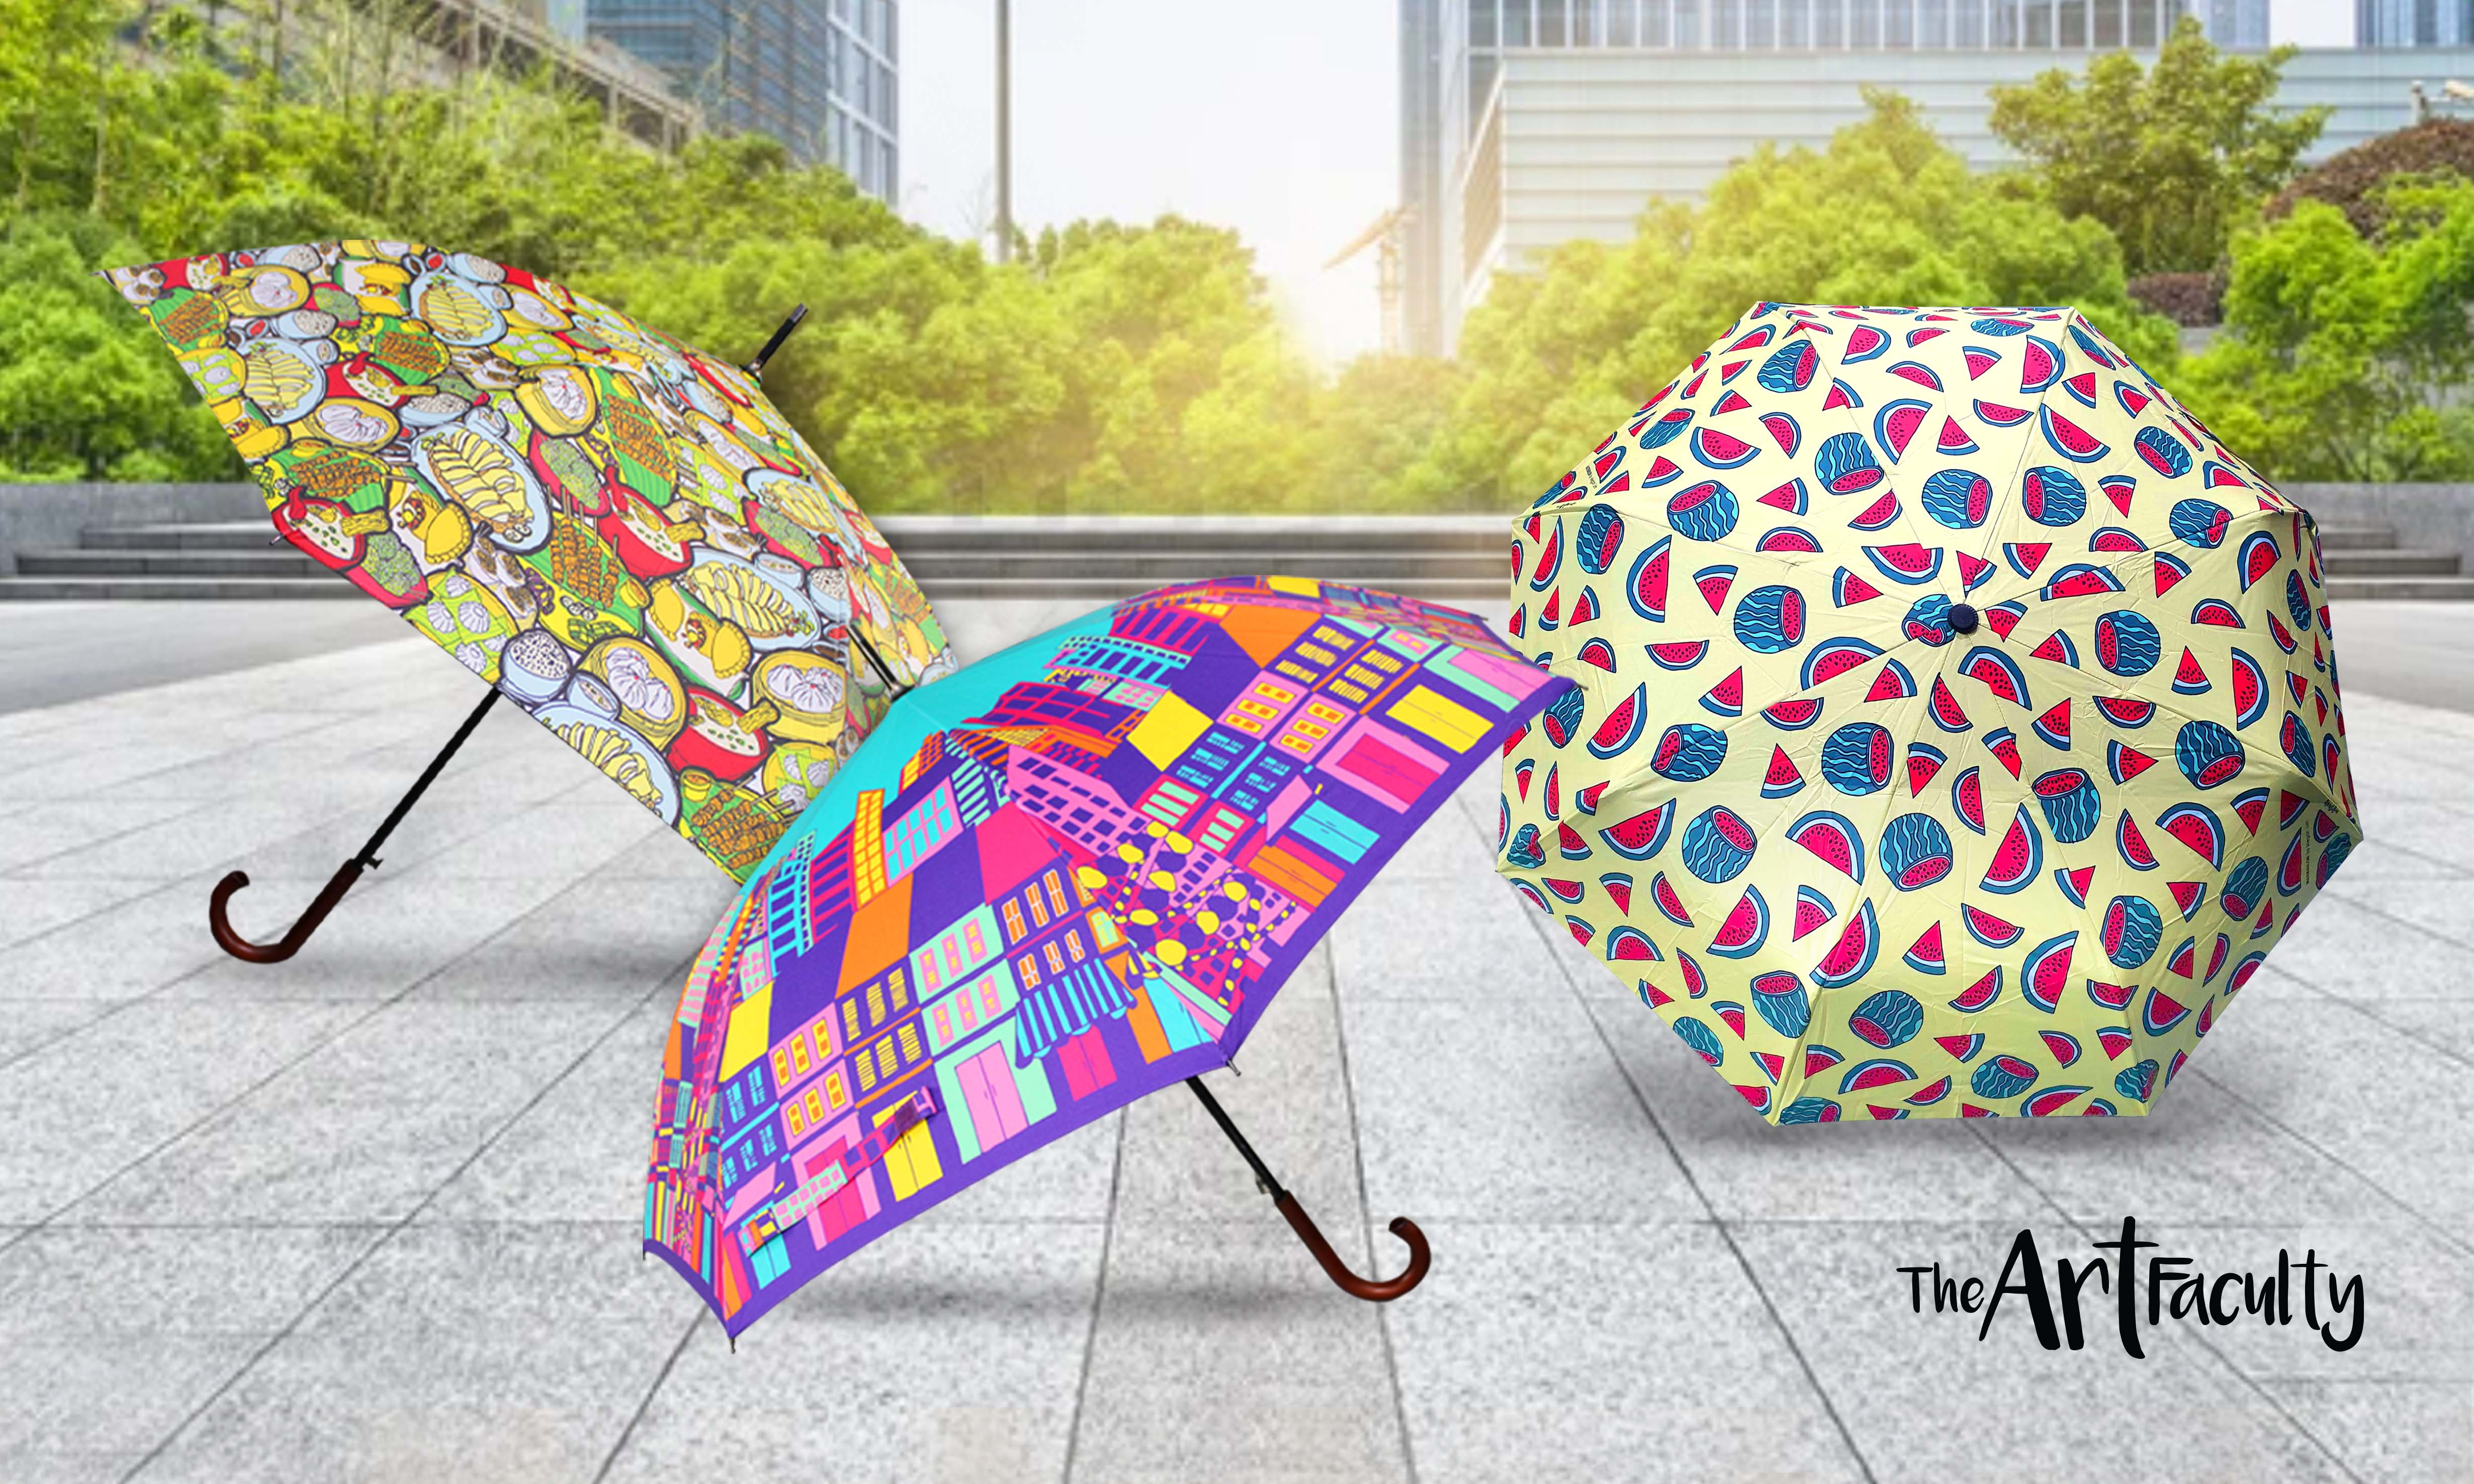 The Art Faculty – Artists Inspired Umbrellas